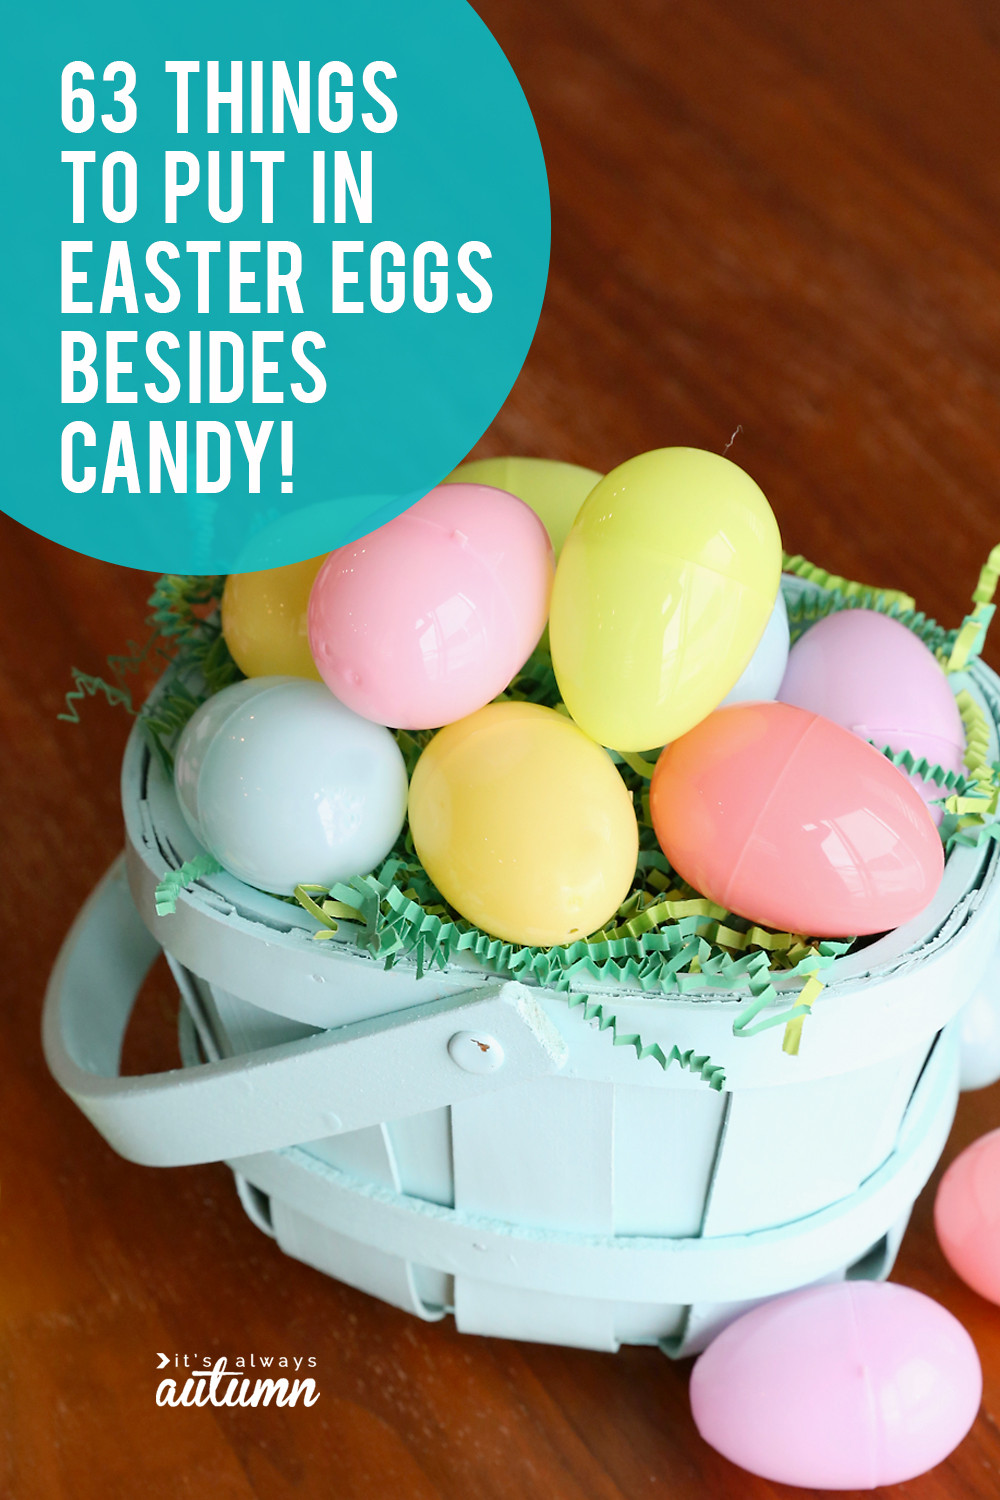 Ideas For Easter Egg Fillers
 63 fantastic Easter egg fillers things to put in Easter